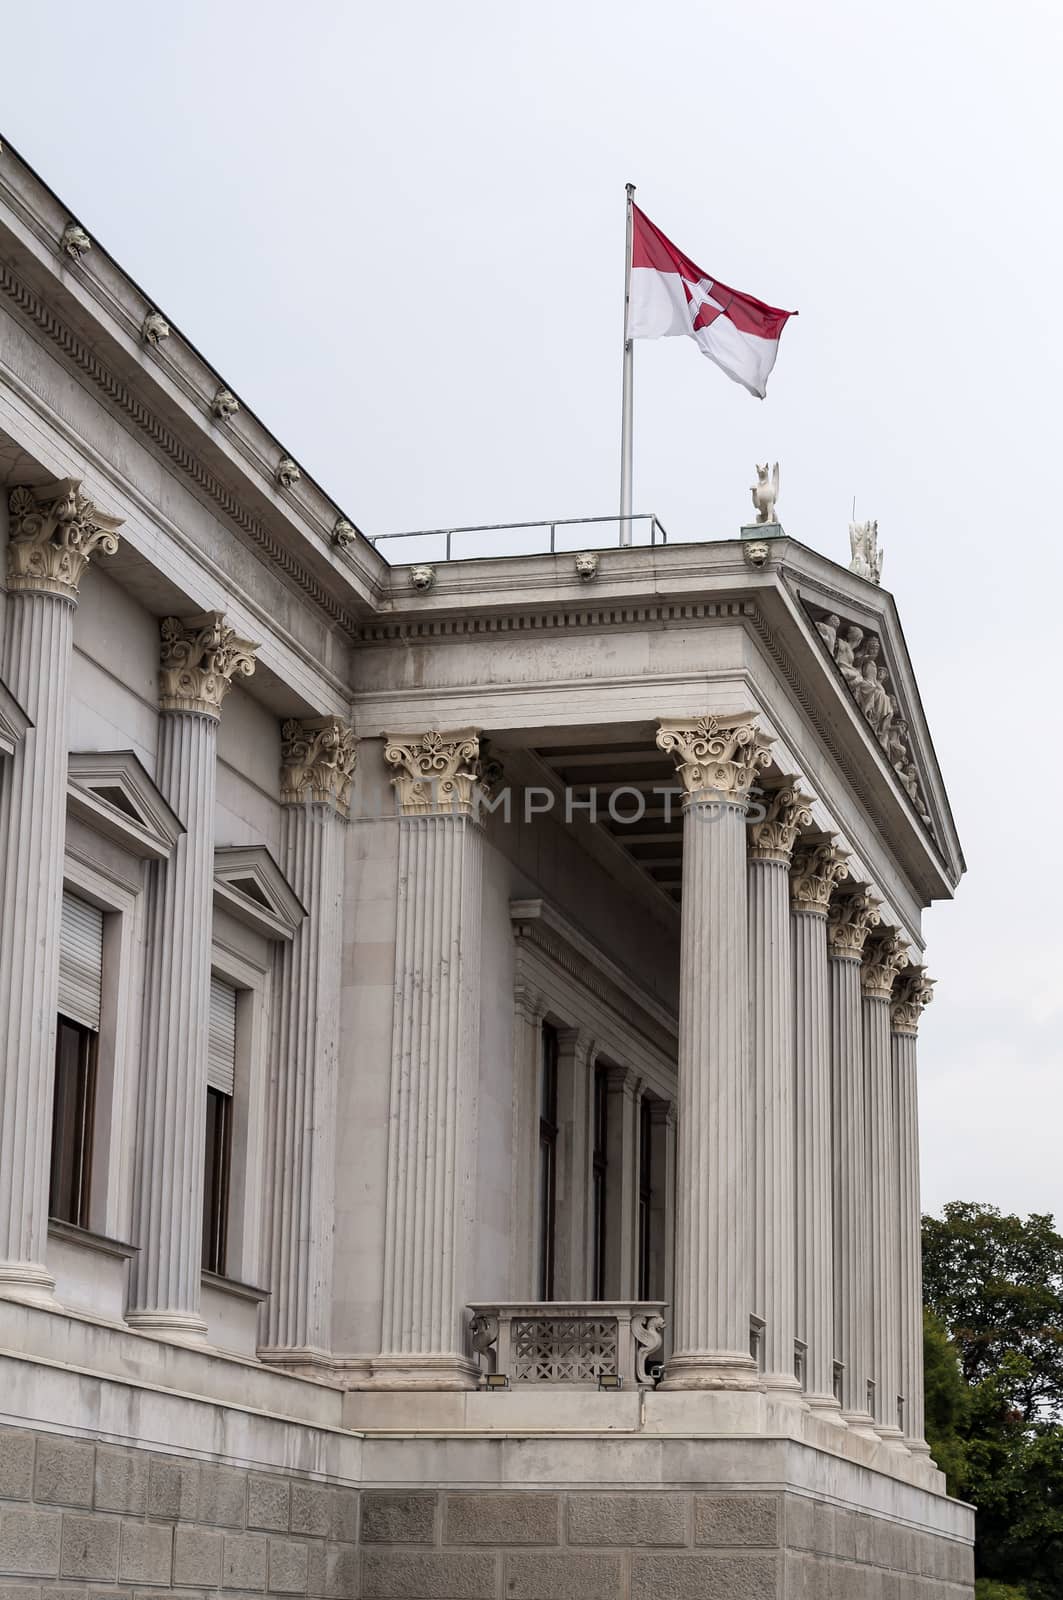 Austrian Parliament building and flag in Vienna.